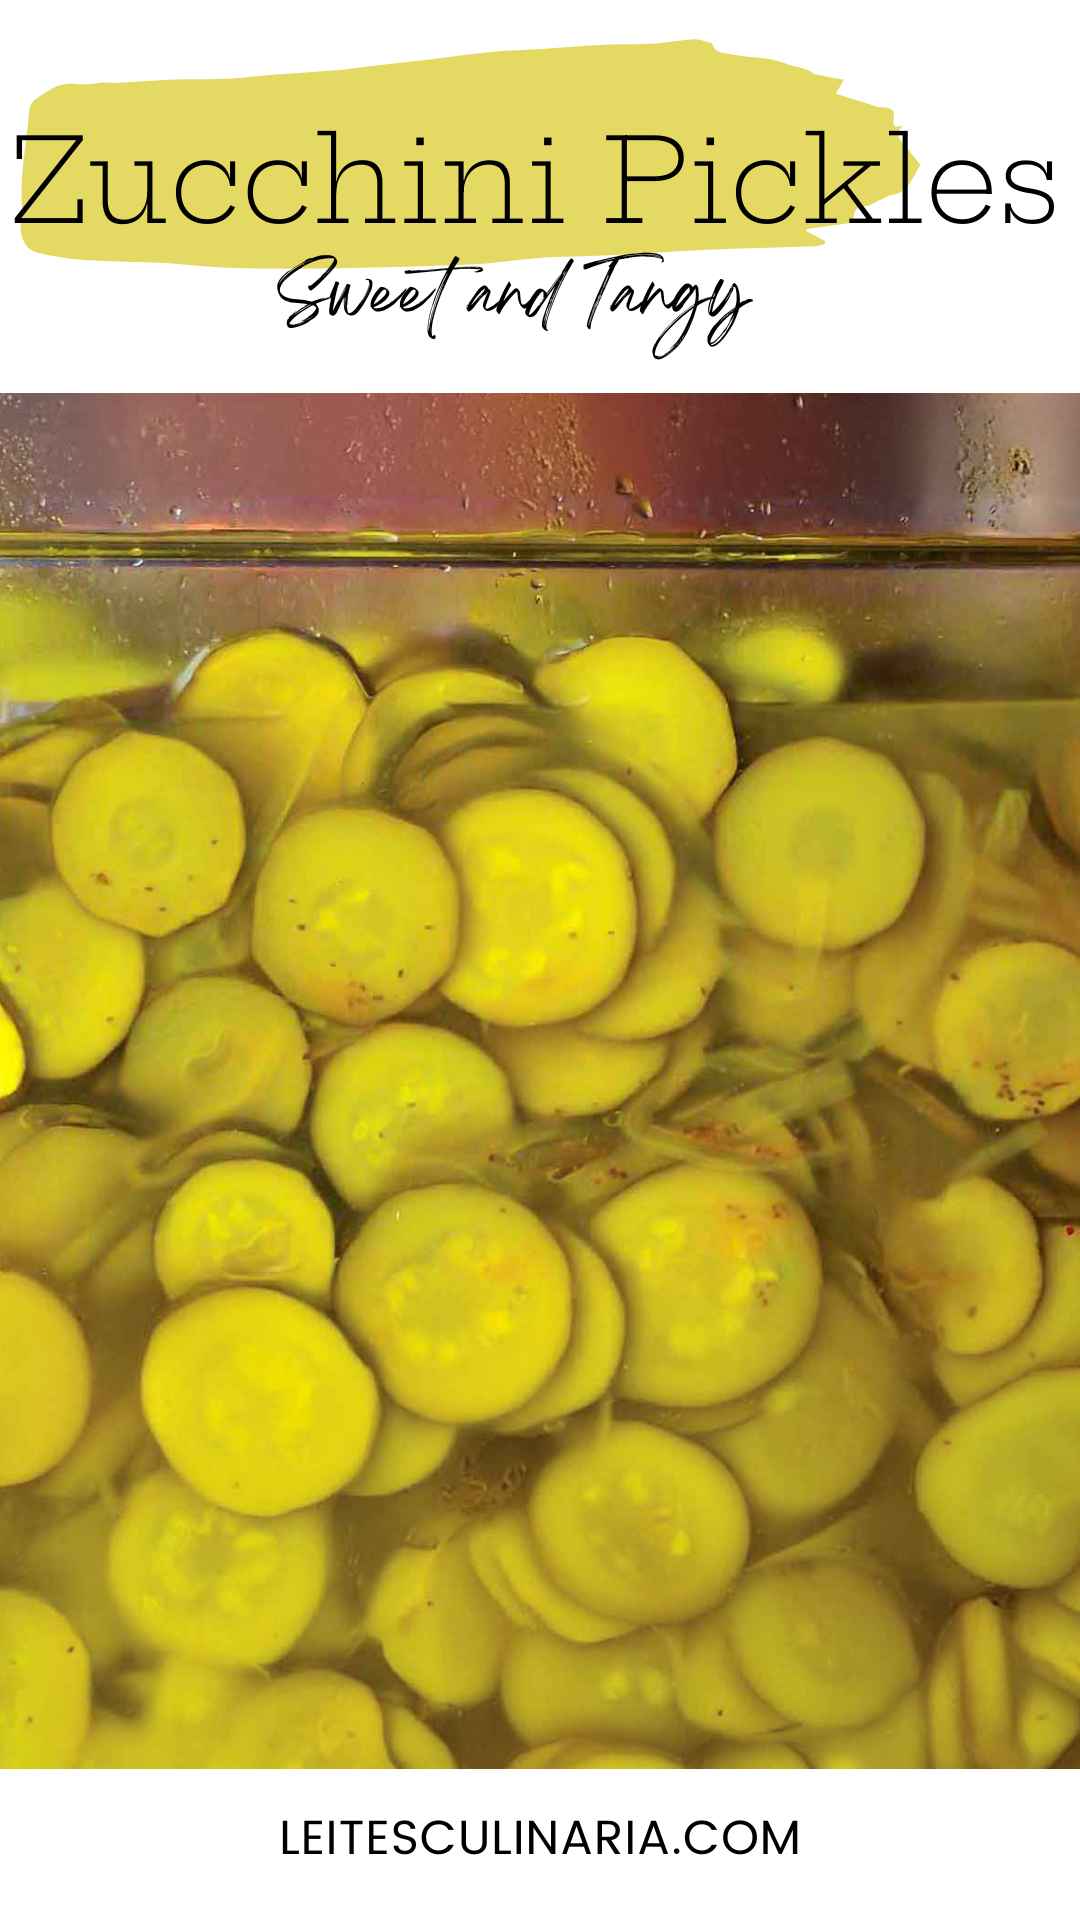 A glass jar filled with pickled zucchini slices in brine.